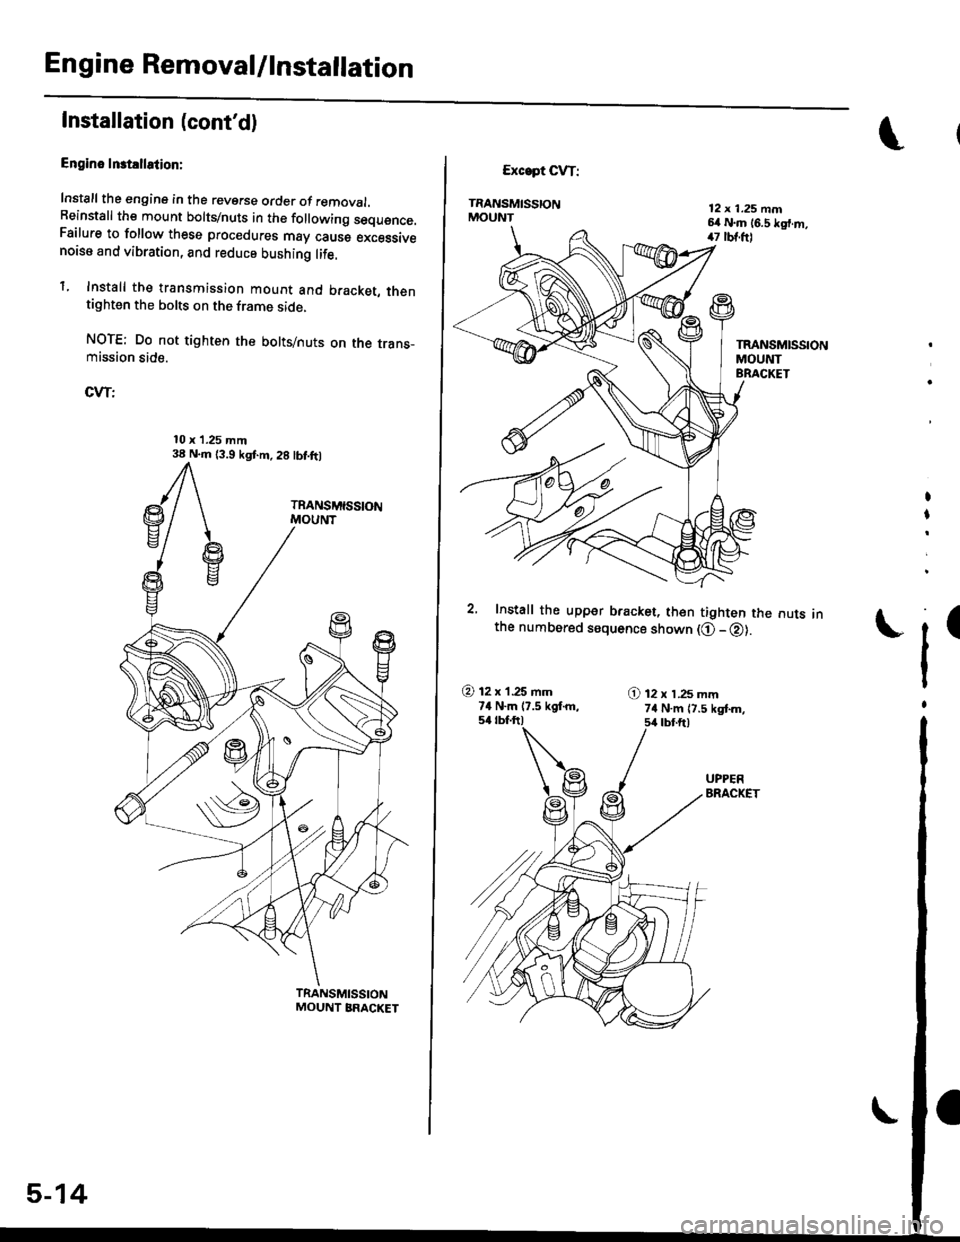 HONDA CIVIC 1999 6.G Workshop Manual Engine Removal/lnstallation
Installation (contd)
Engino Inst!llation:
Install the engine in the reverse order of removal.Beinstall the mount bolts/nuts in the following sequence.Failure to follow the